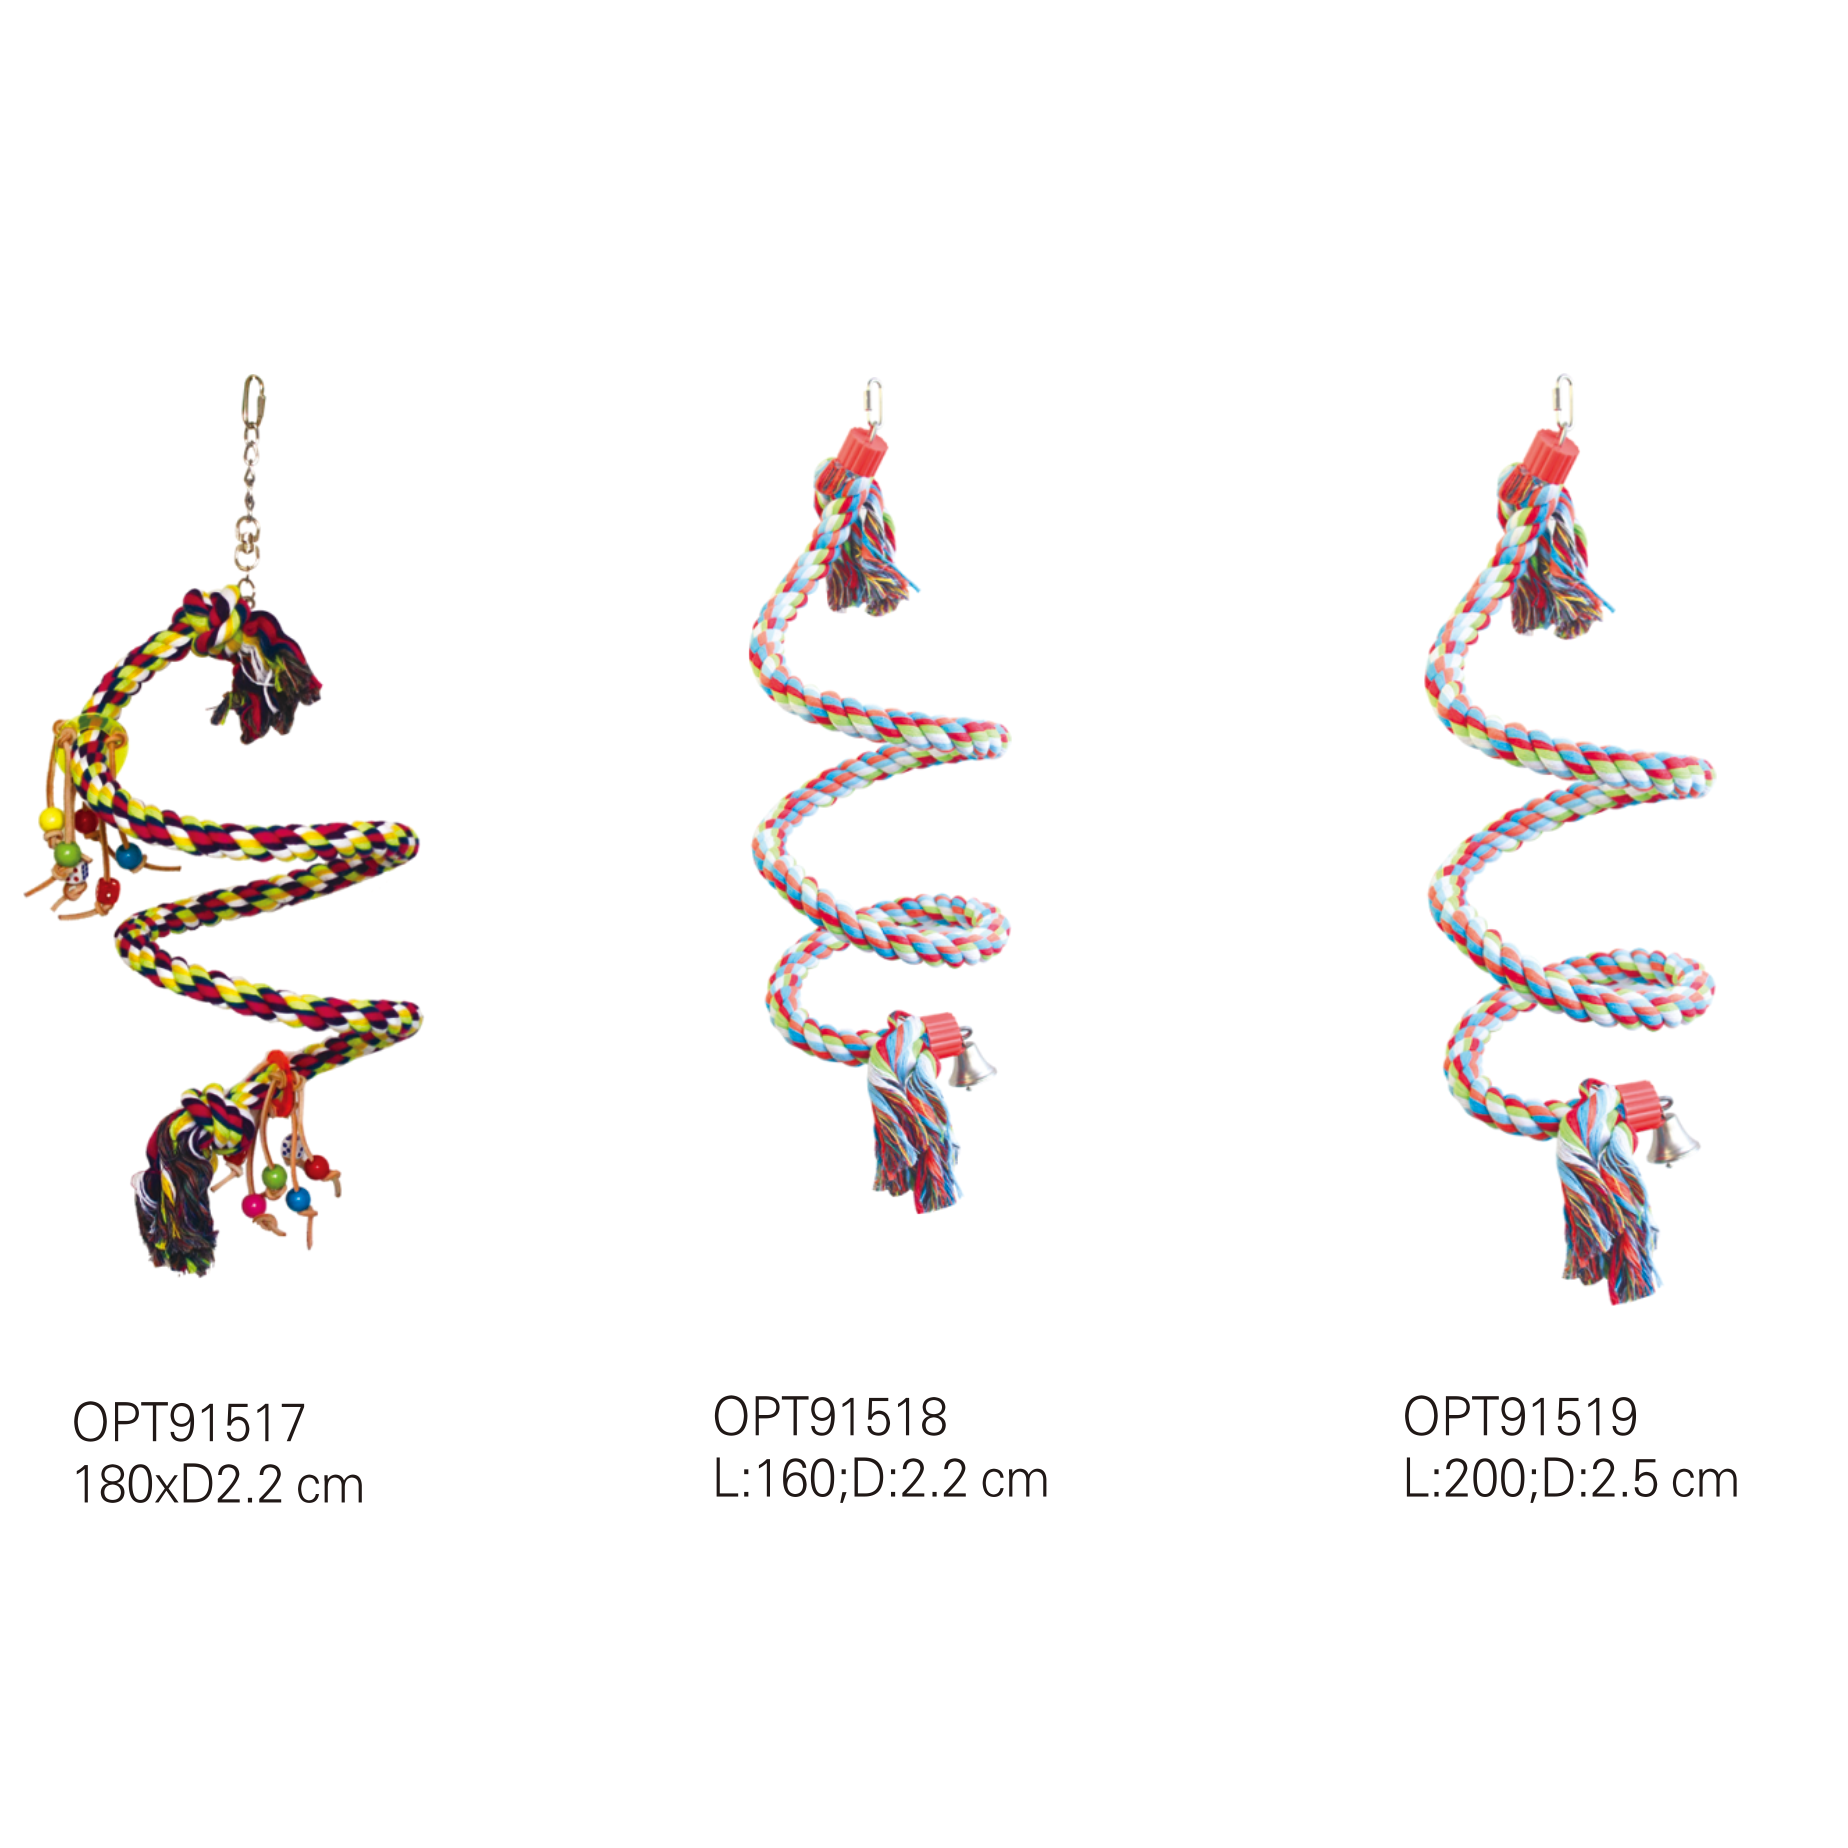 OPT91517-OPT91519 Bird toys Rope toys